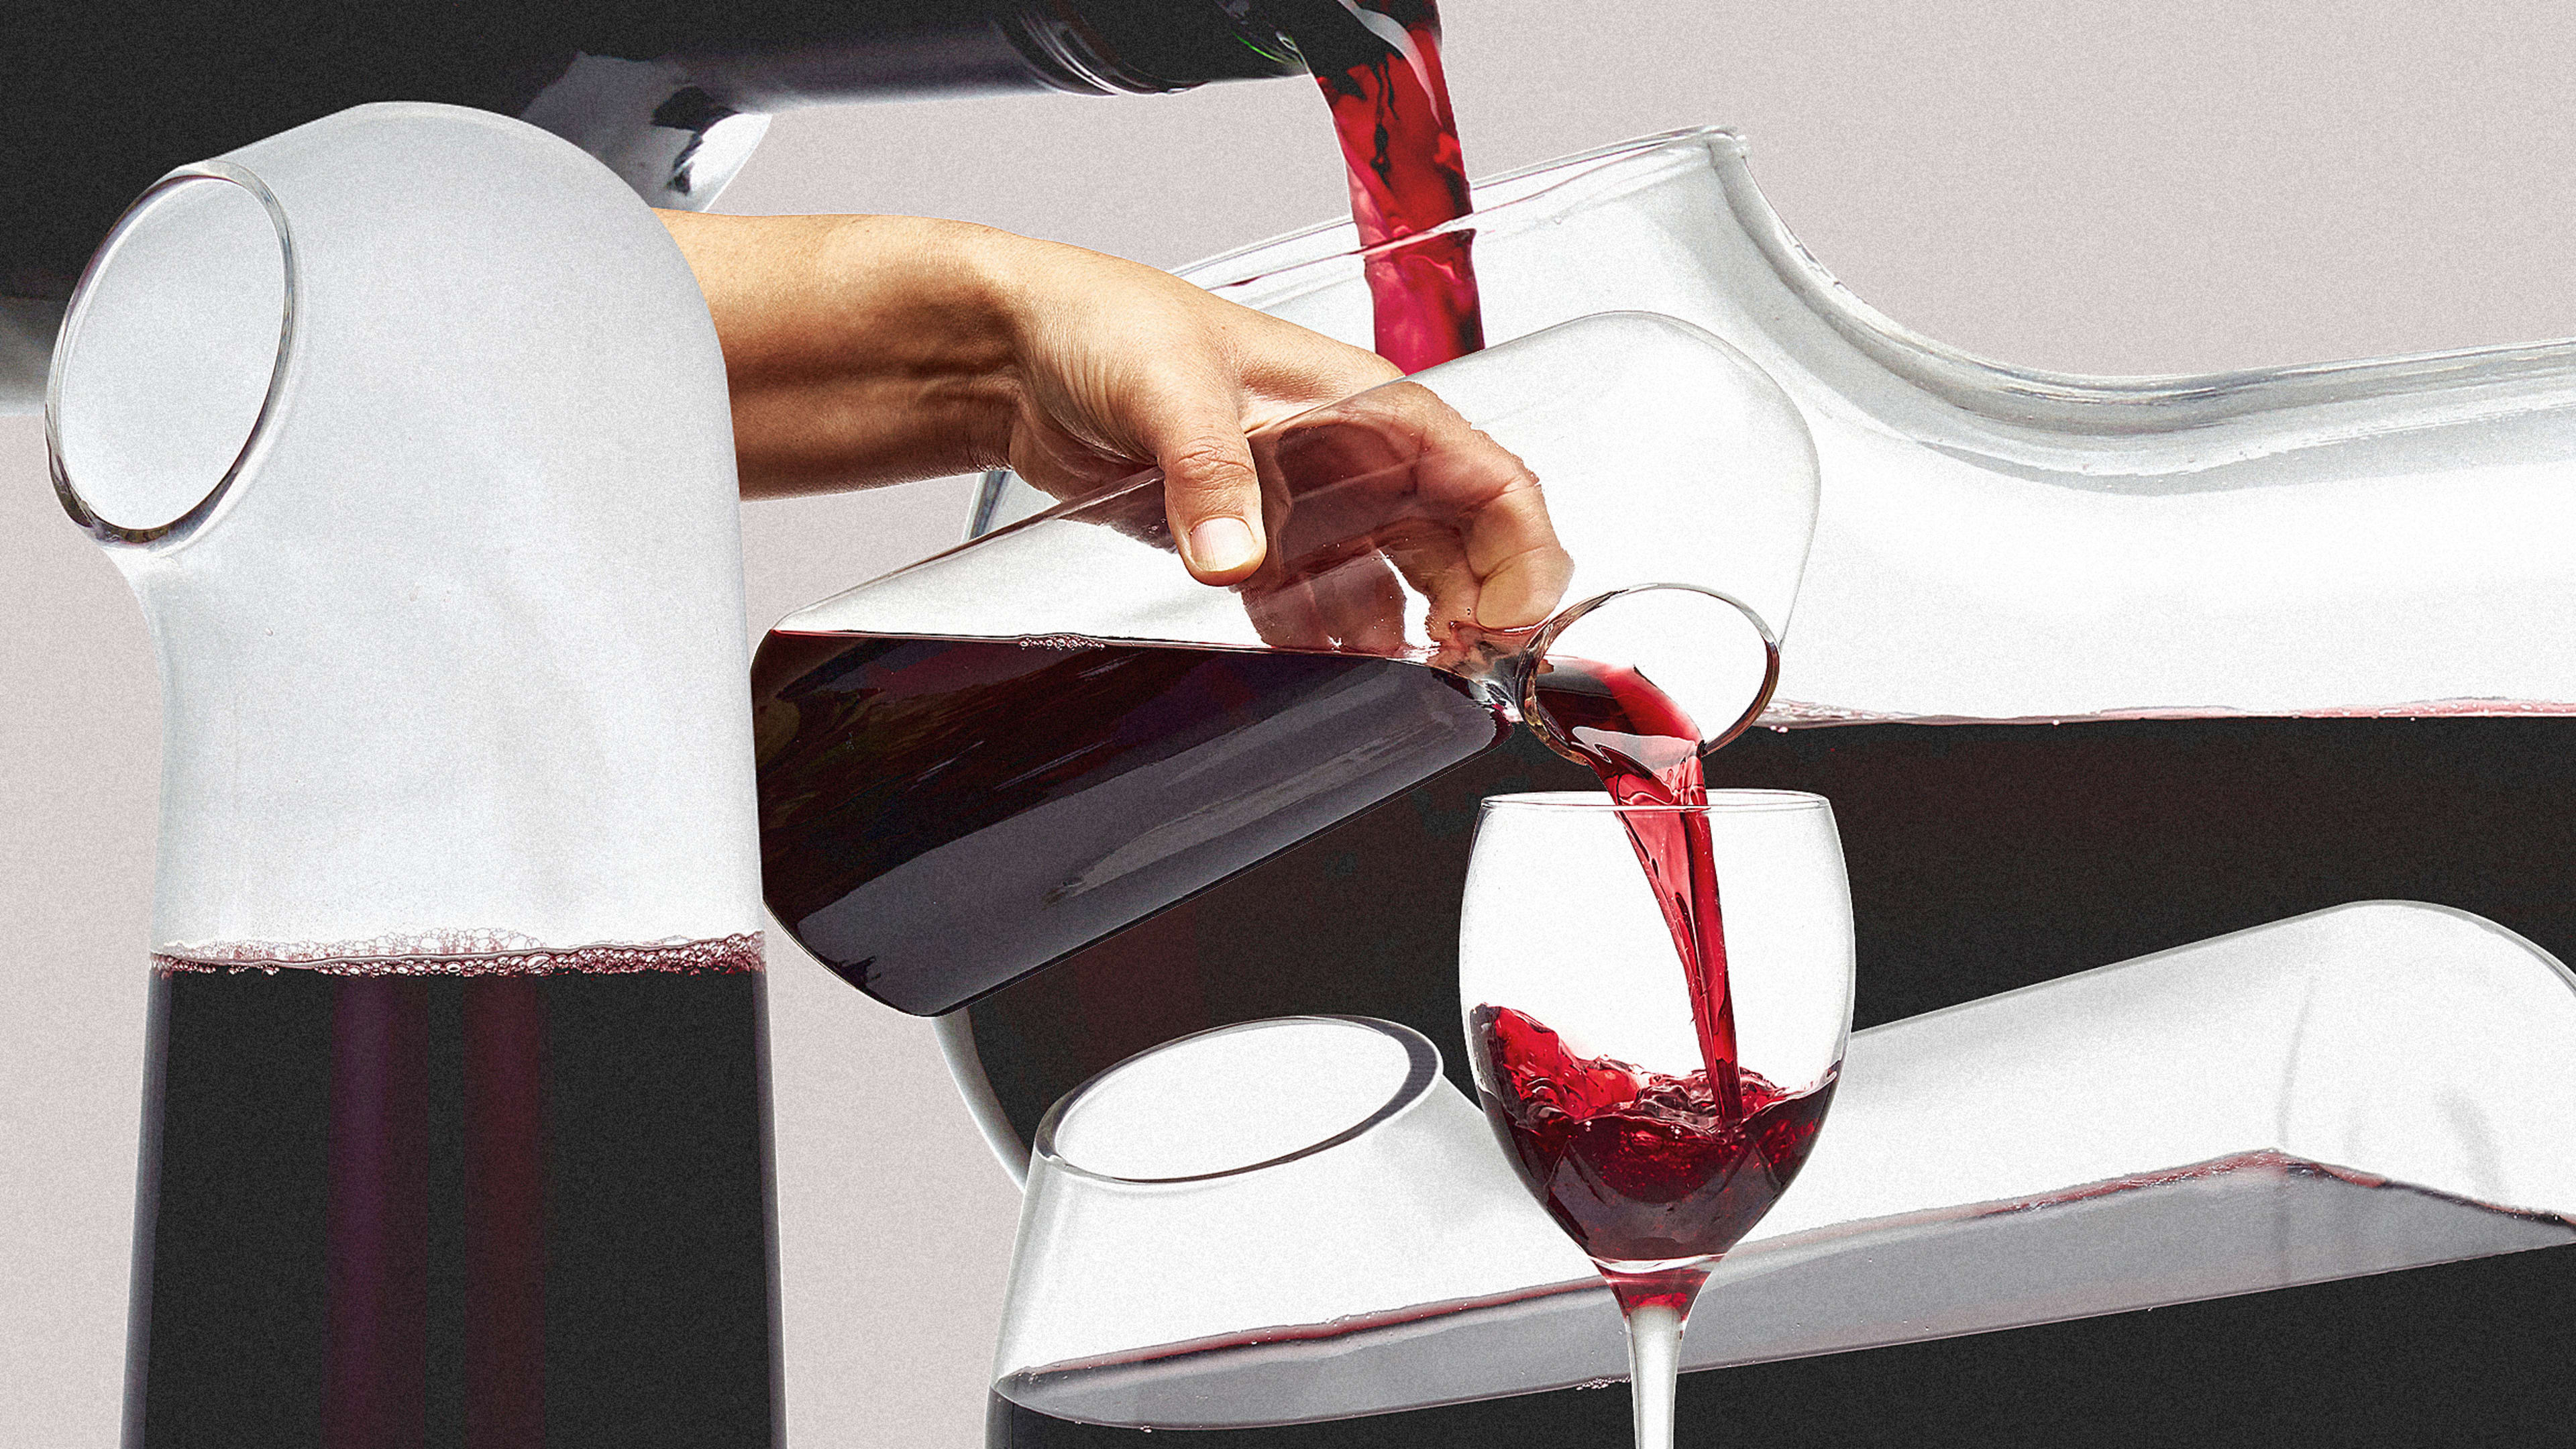 A designer reinvents the humble wine decanter by flipping it 180 degrees